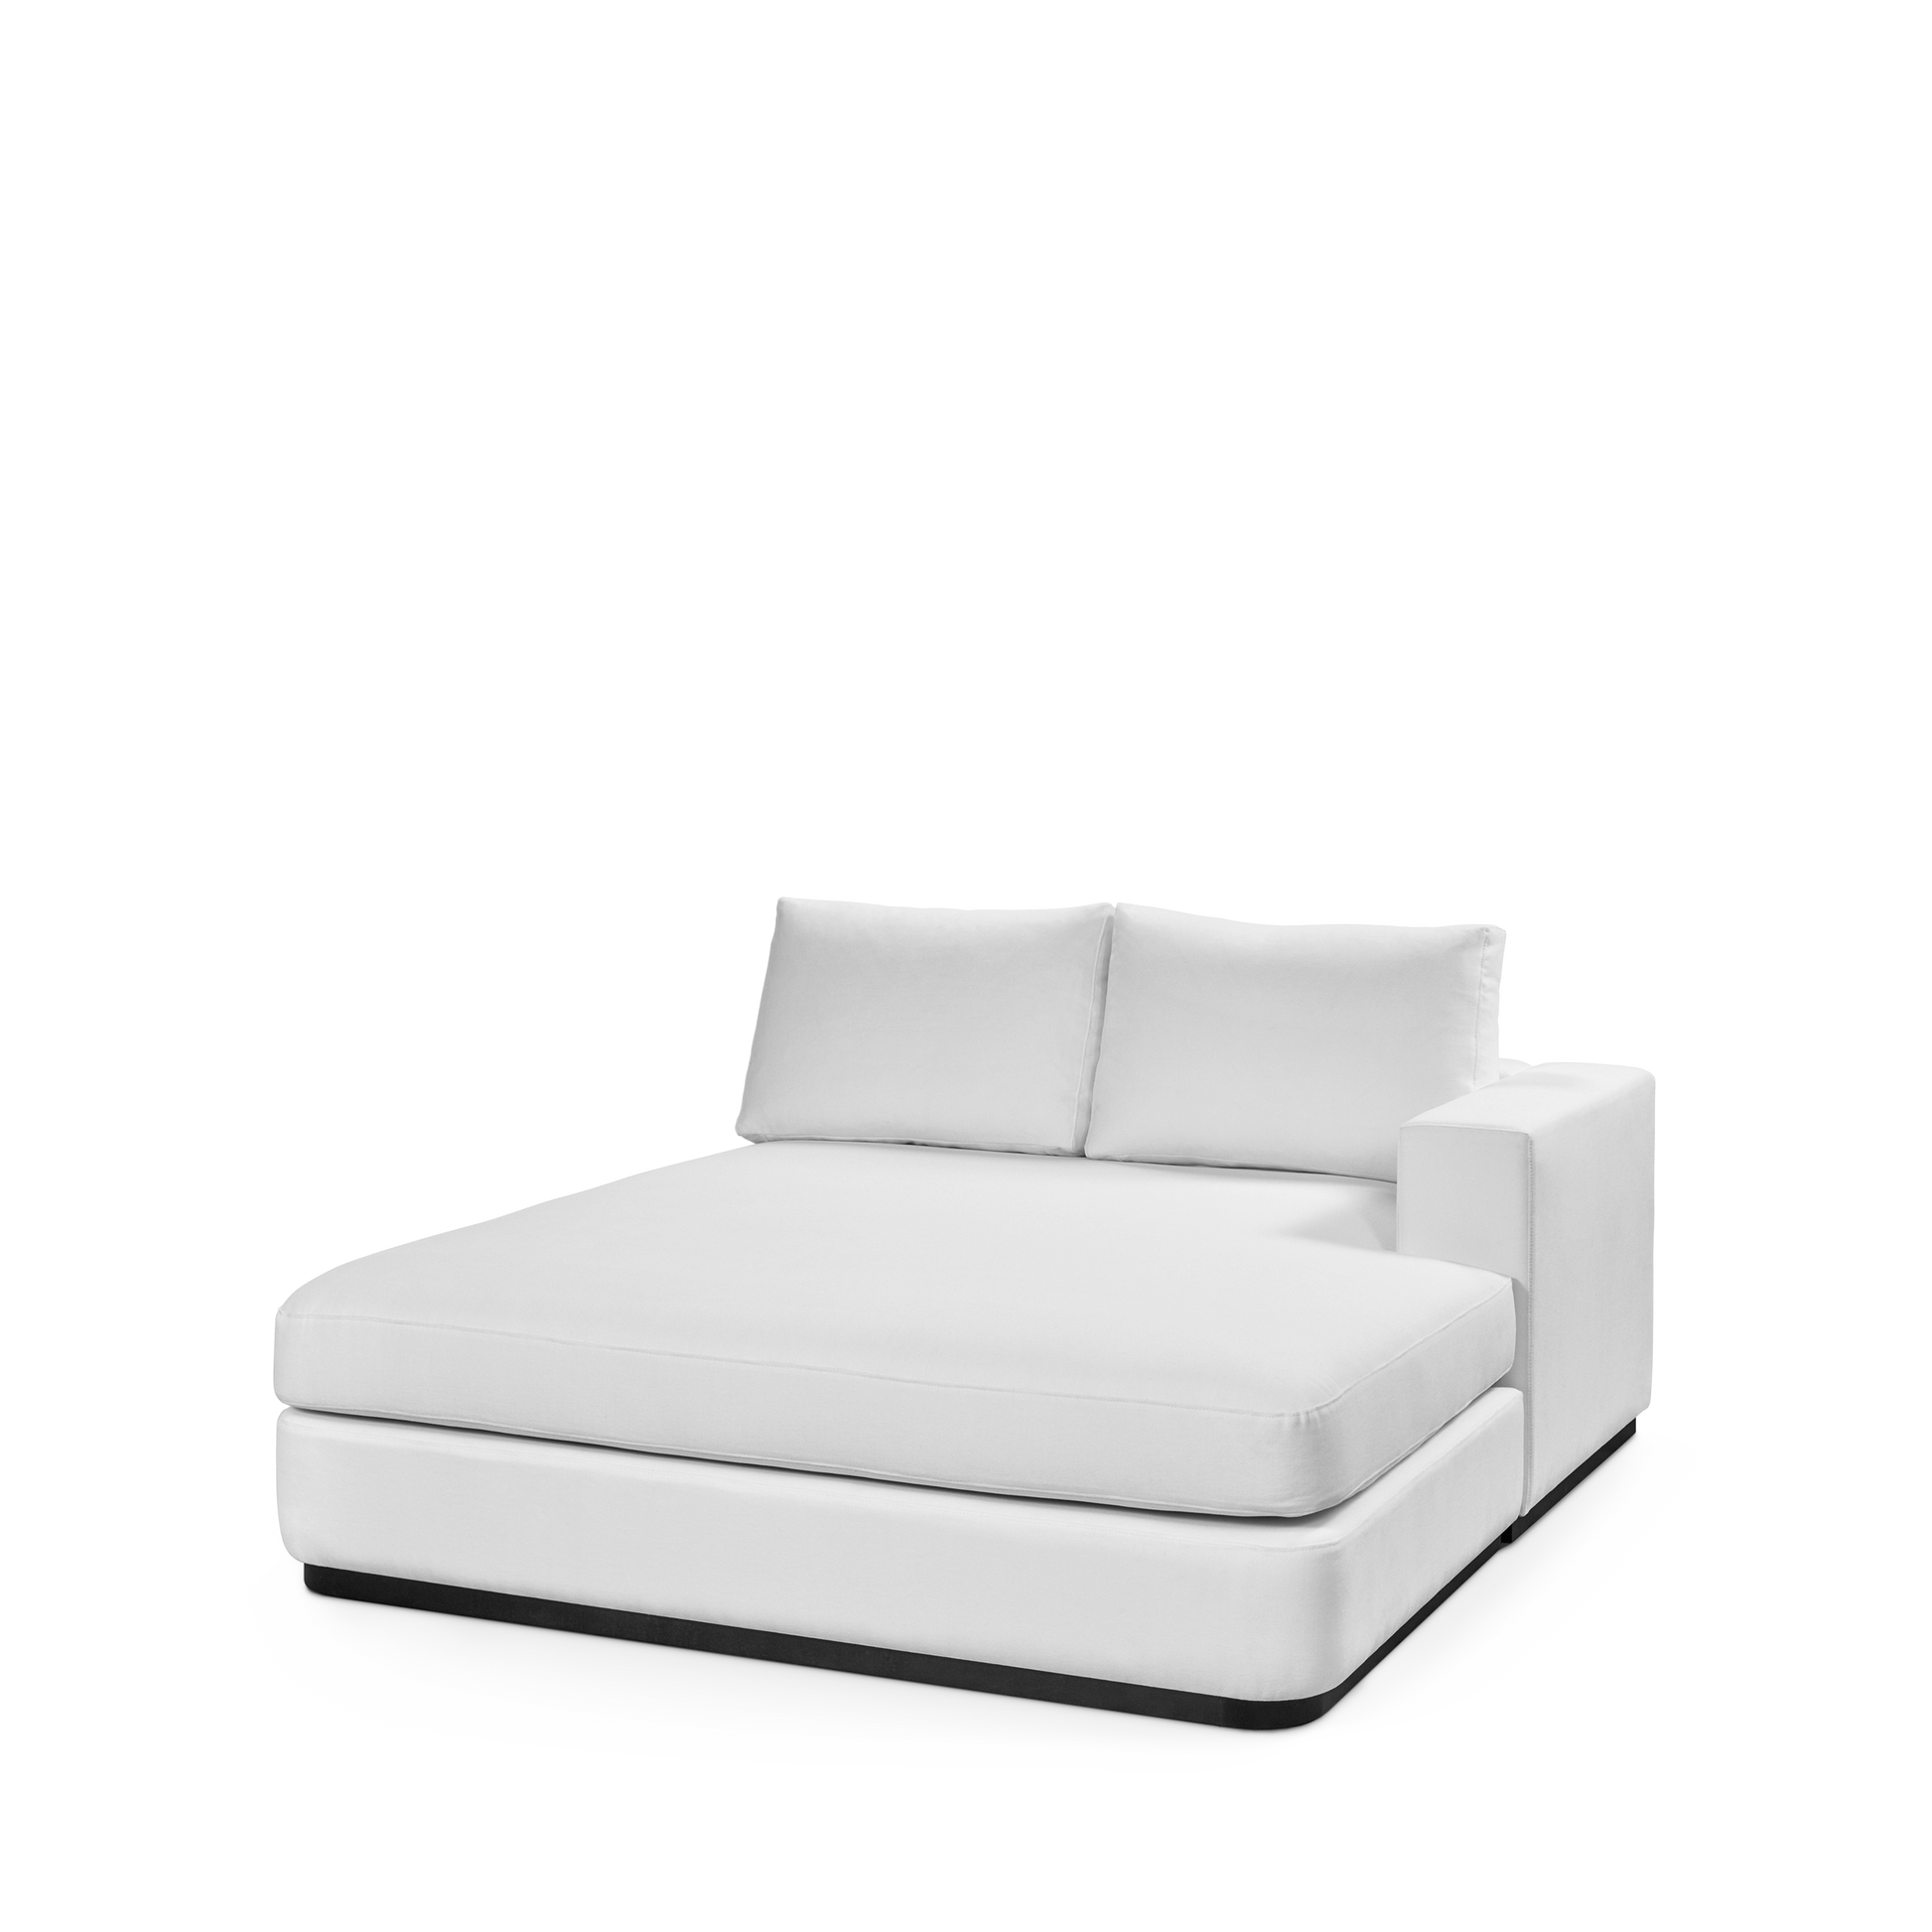 ATLAS 160 Lounge Bed arm rest right with linara white textile